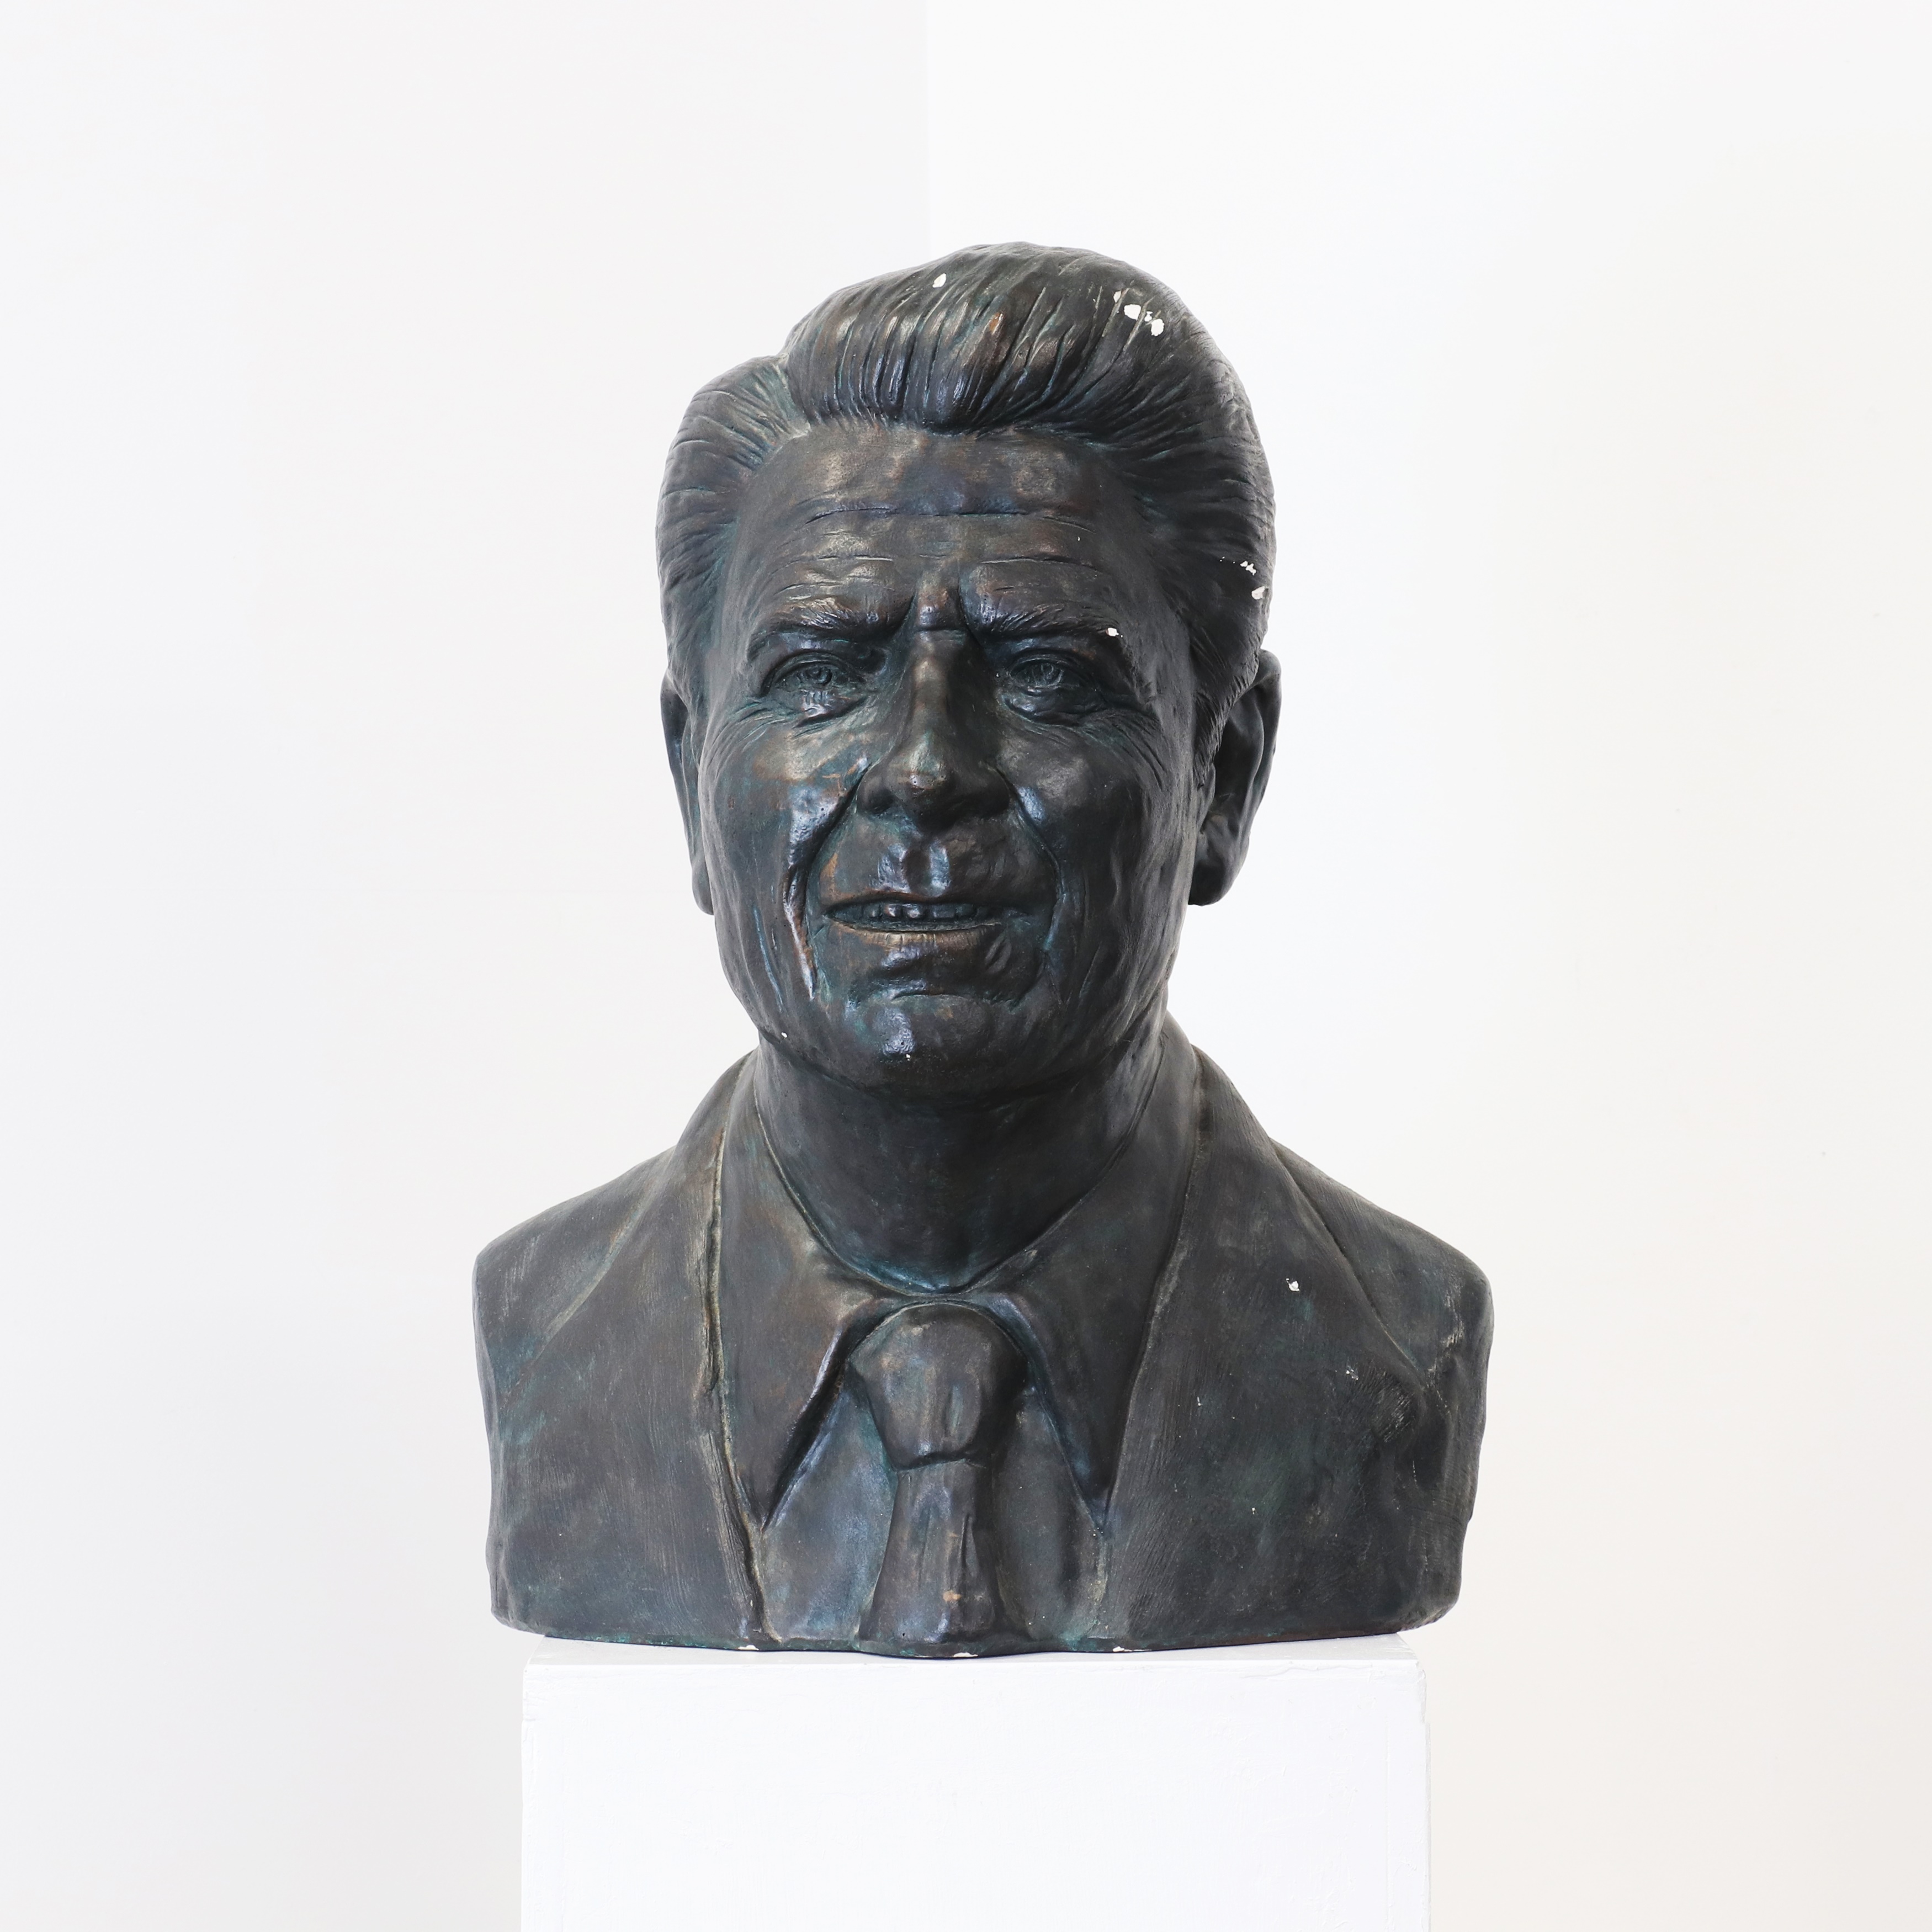 A large bronzed plaster bust of Ronald Reagan - £500-£700